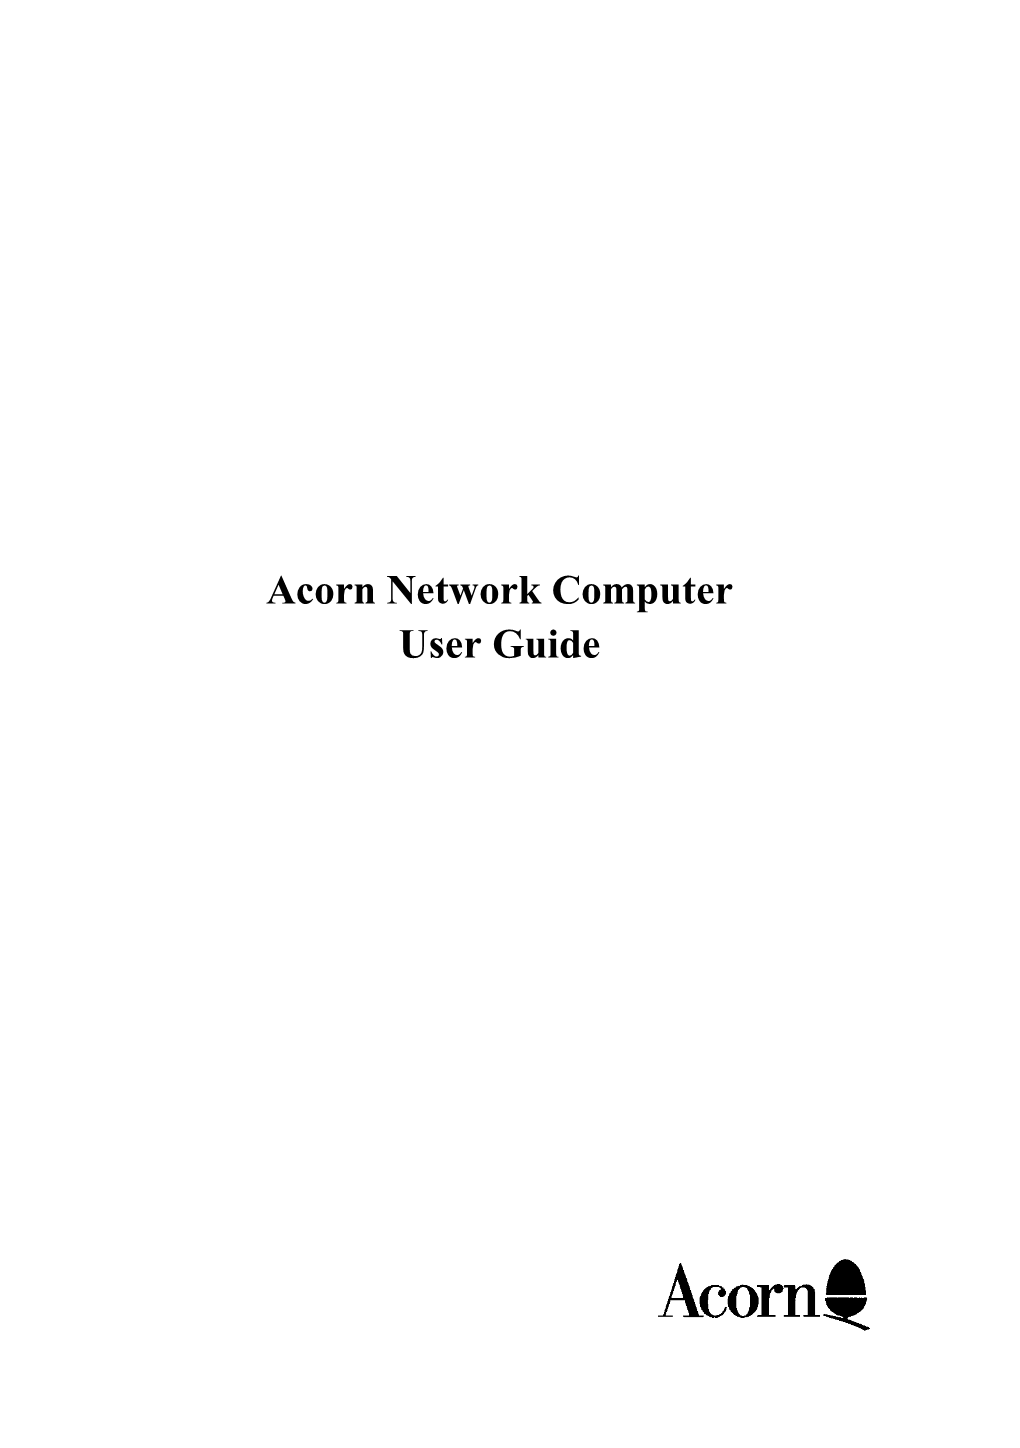 Acorn Network Computer User Guide Copyright © 1996, 1997 Acorn Computers Limited